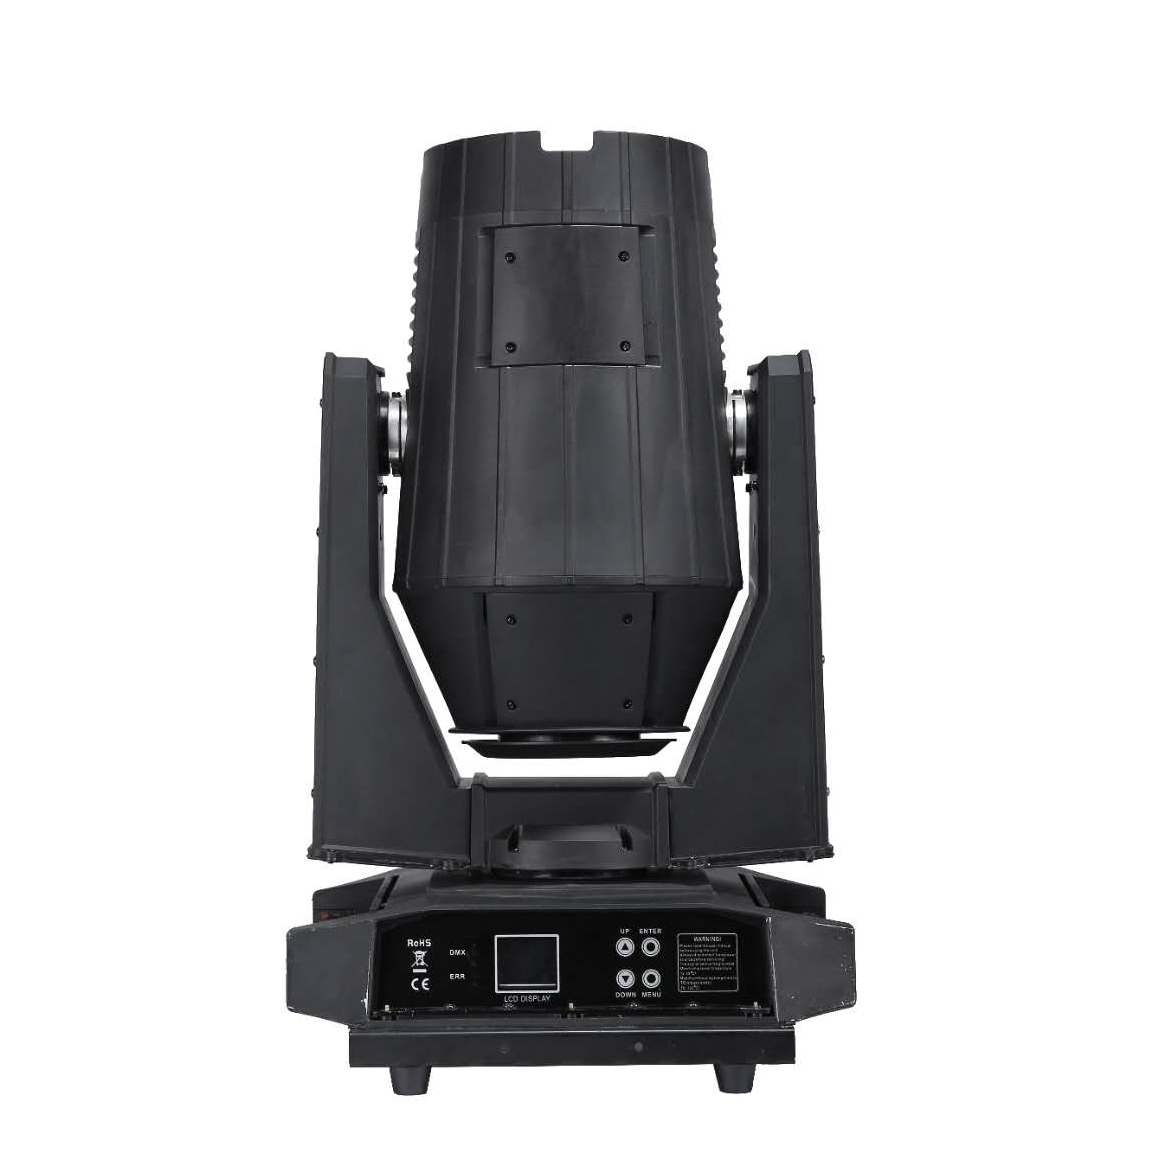 BY-9350B IP56 Outdoor 17R 350W Beam Moving Head Light